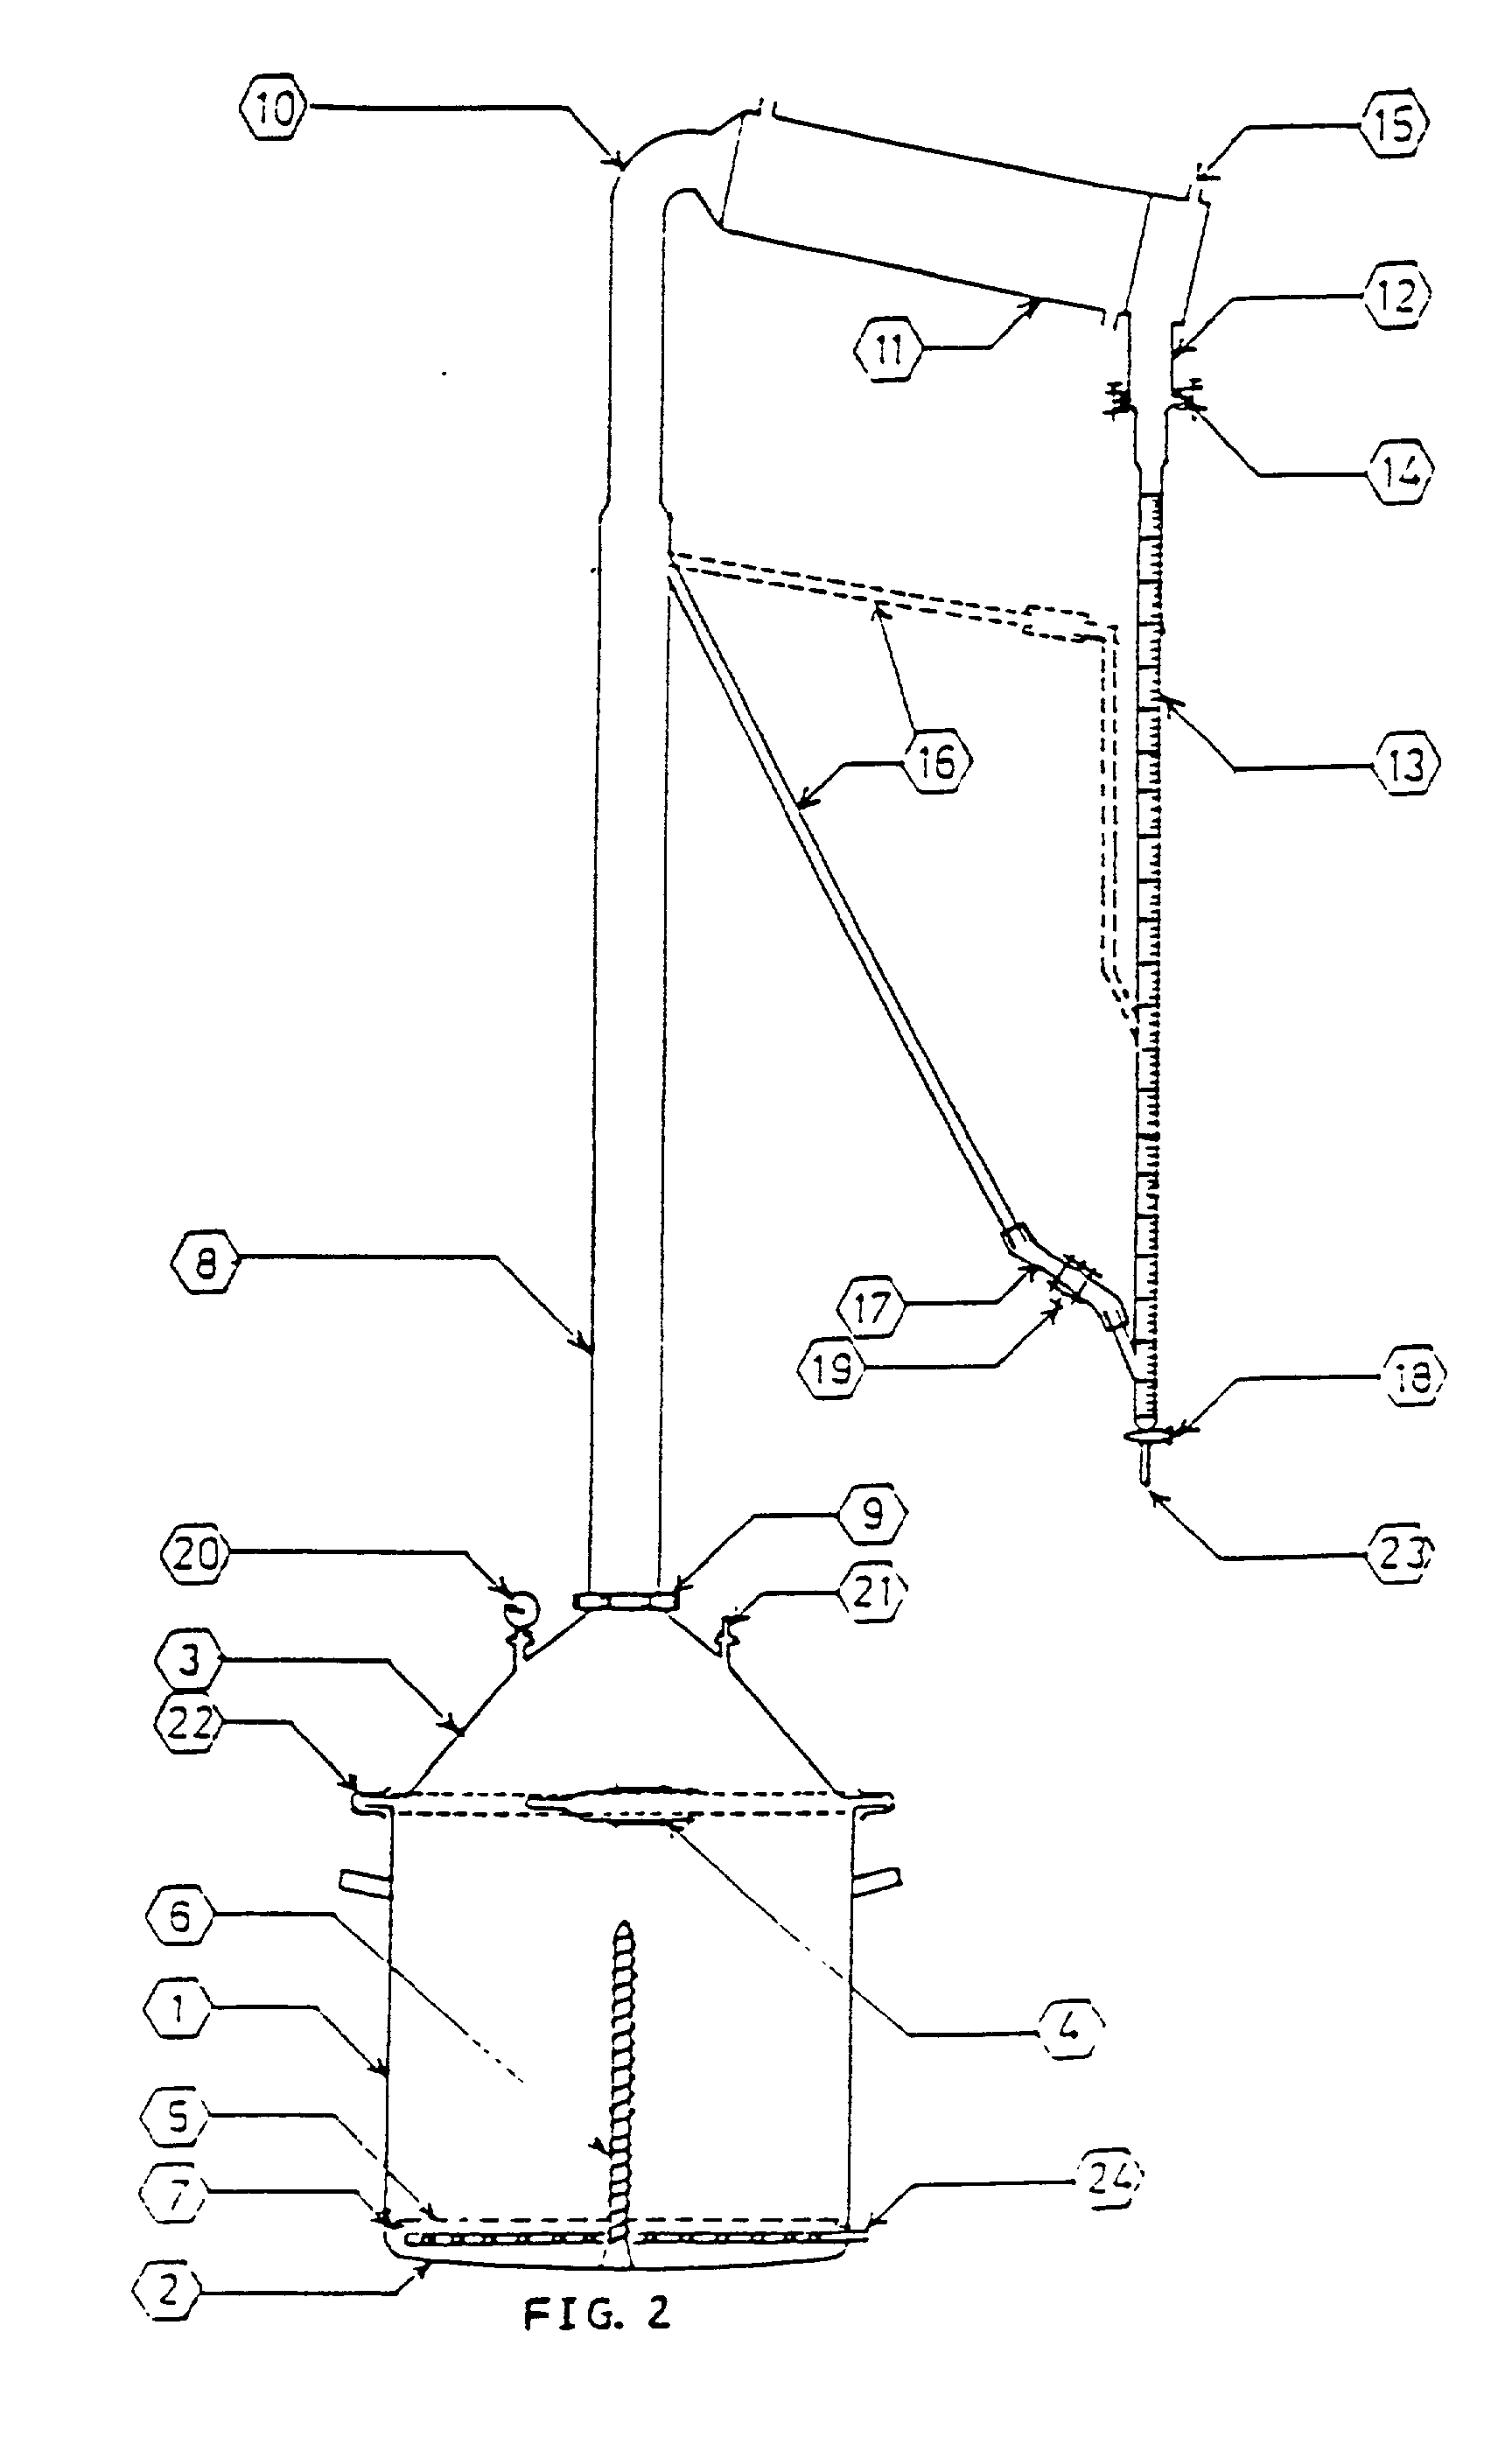 Simple portable mini distillation apparatus for the production of essential oils and hydrosols